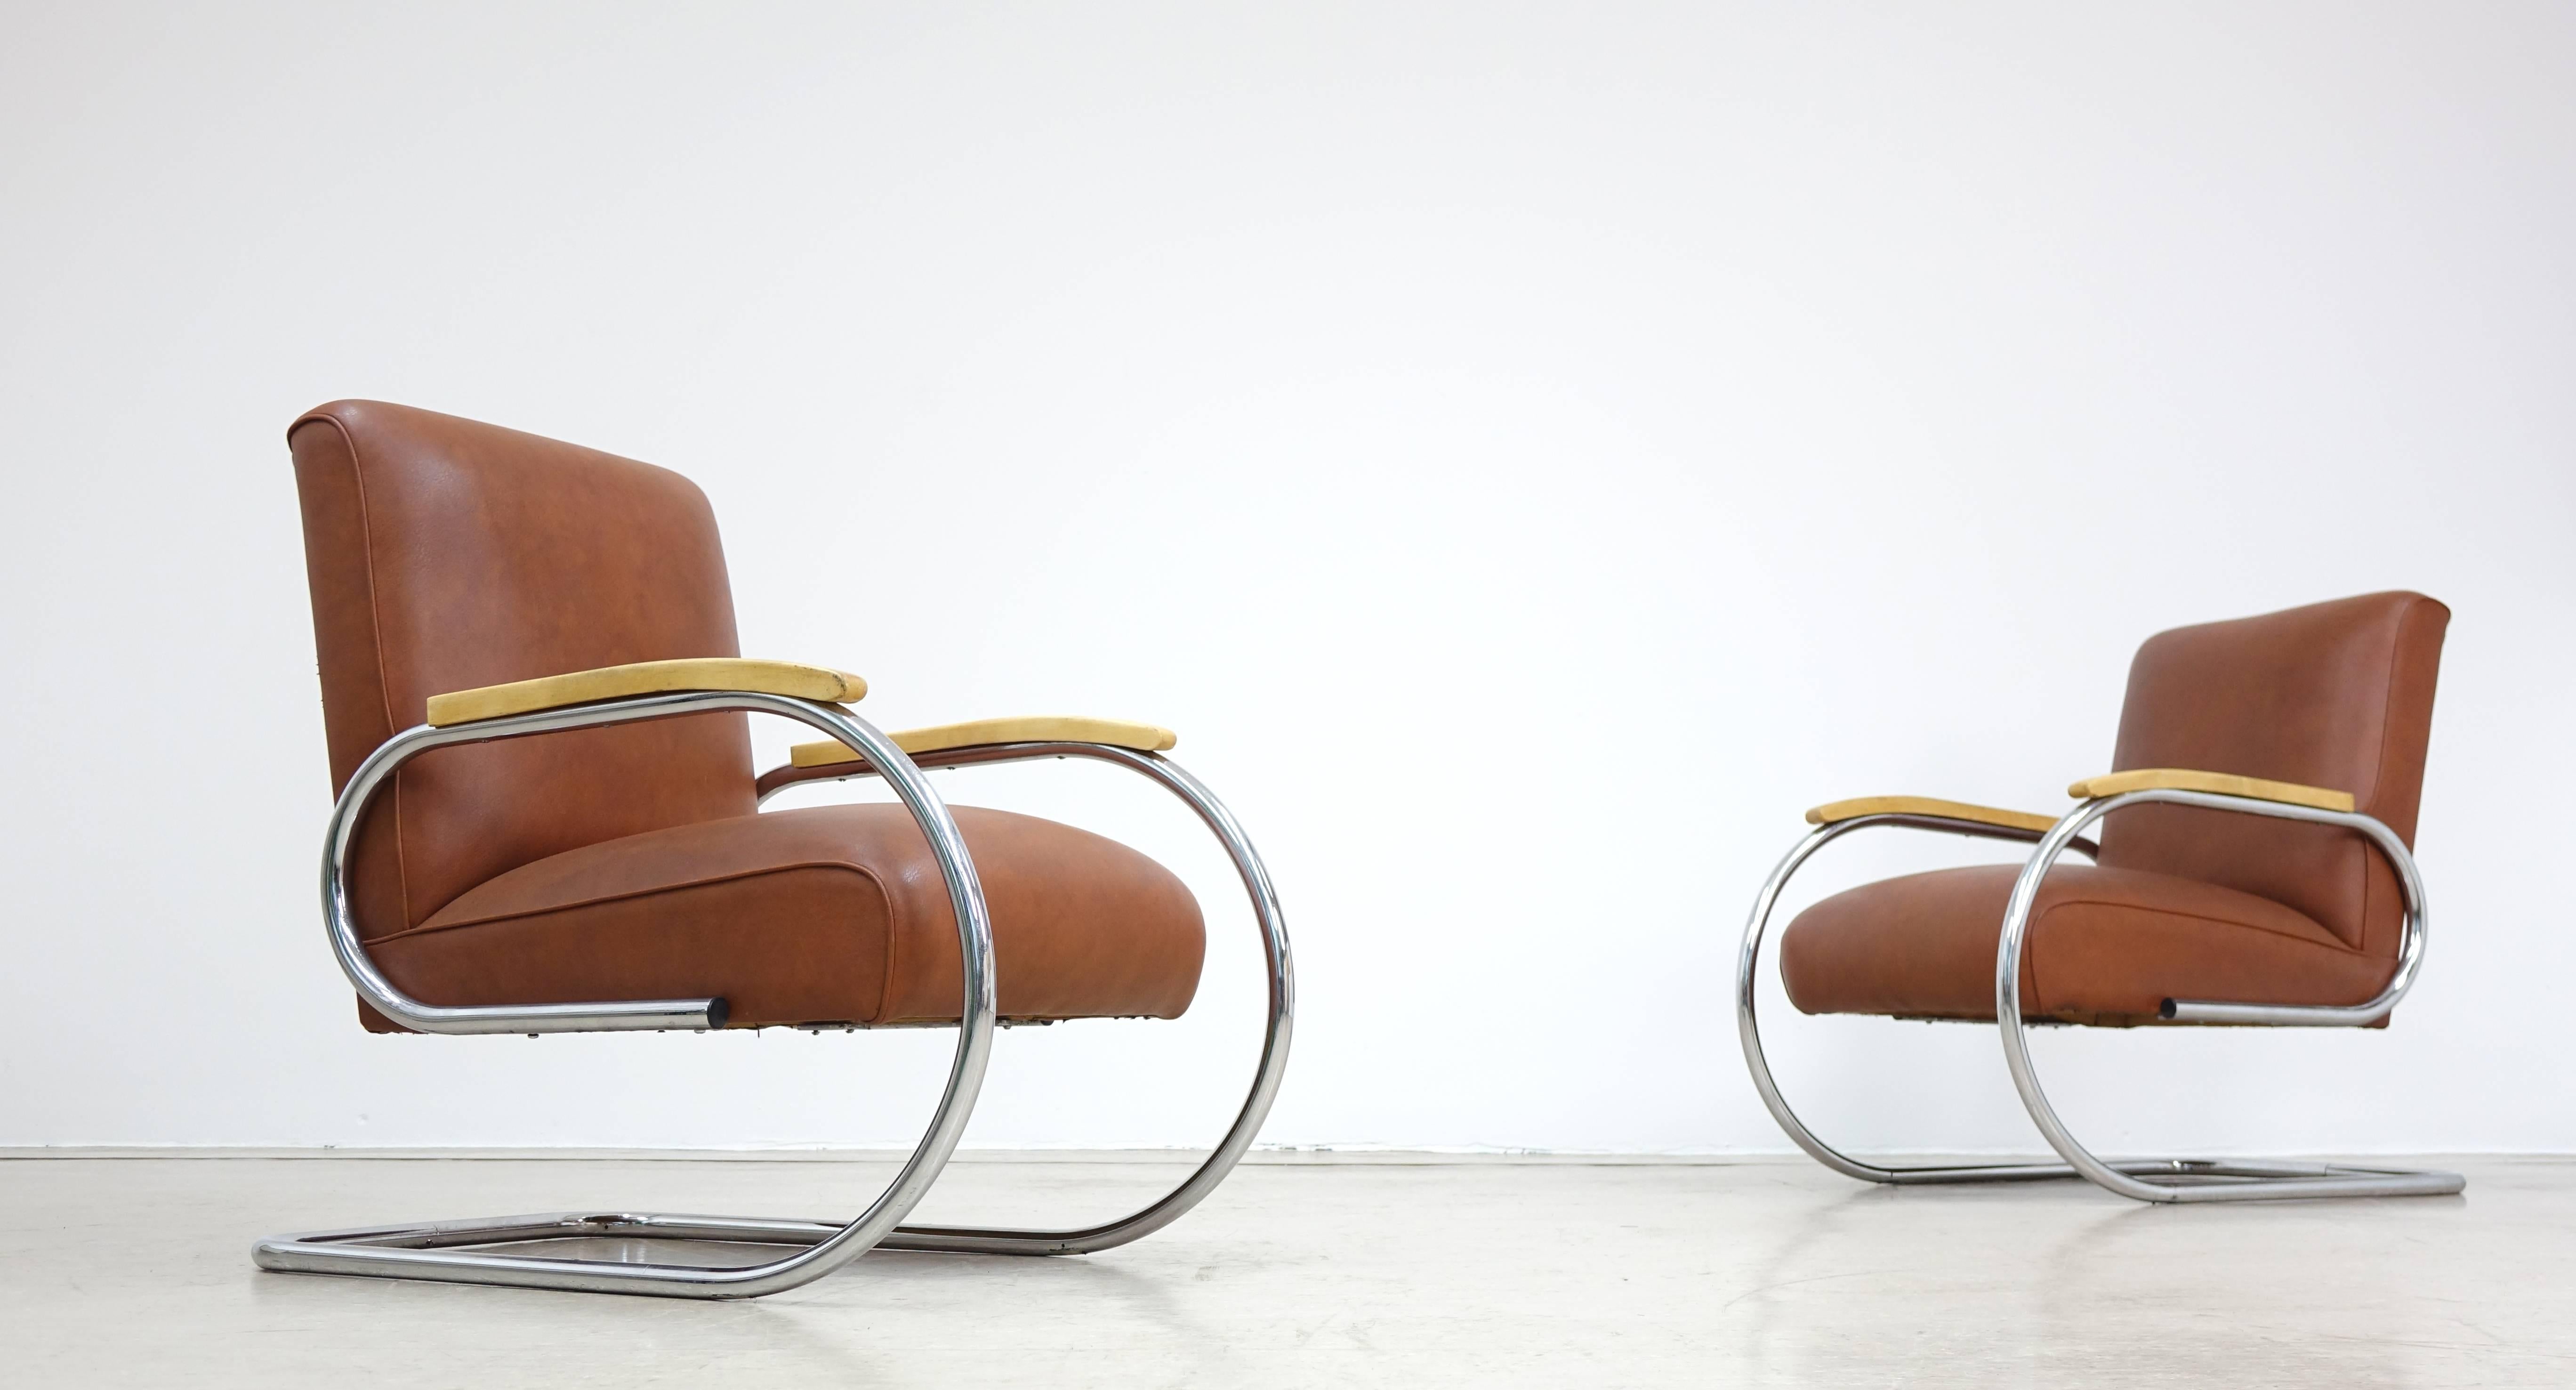 Tubax, France, Belgium.
Bauhaus Stelltube easy chair or clubchair, chromed steeltube with wooden armrests, very comfortable swinging is possible!